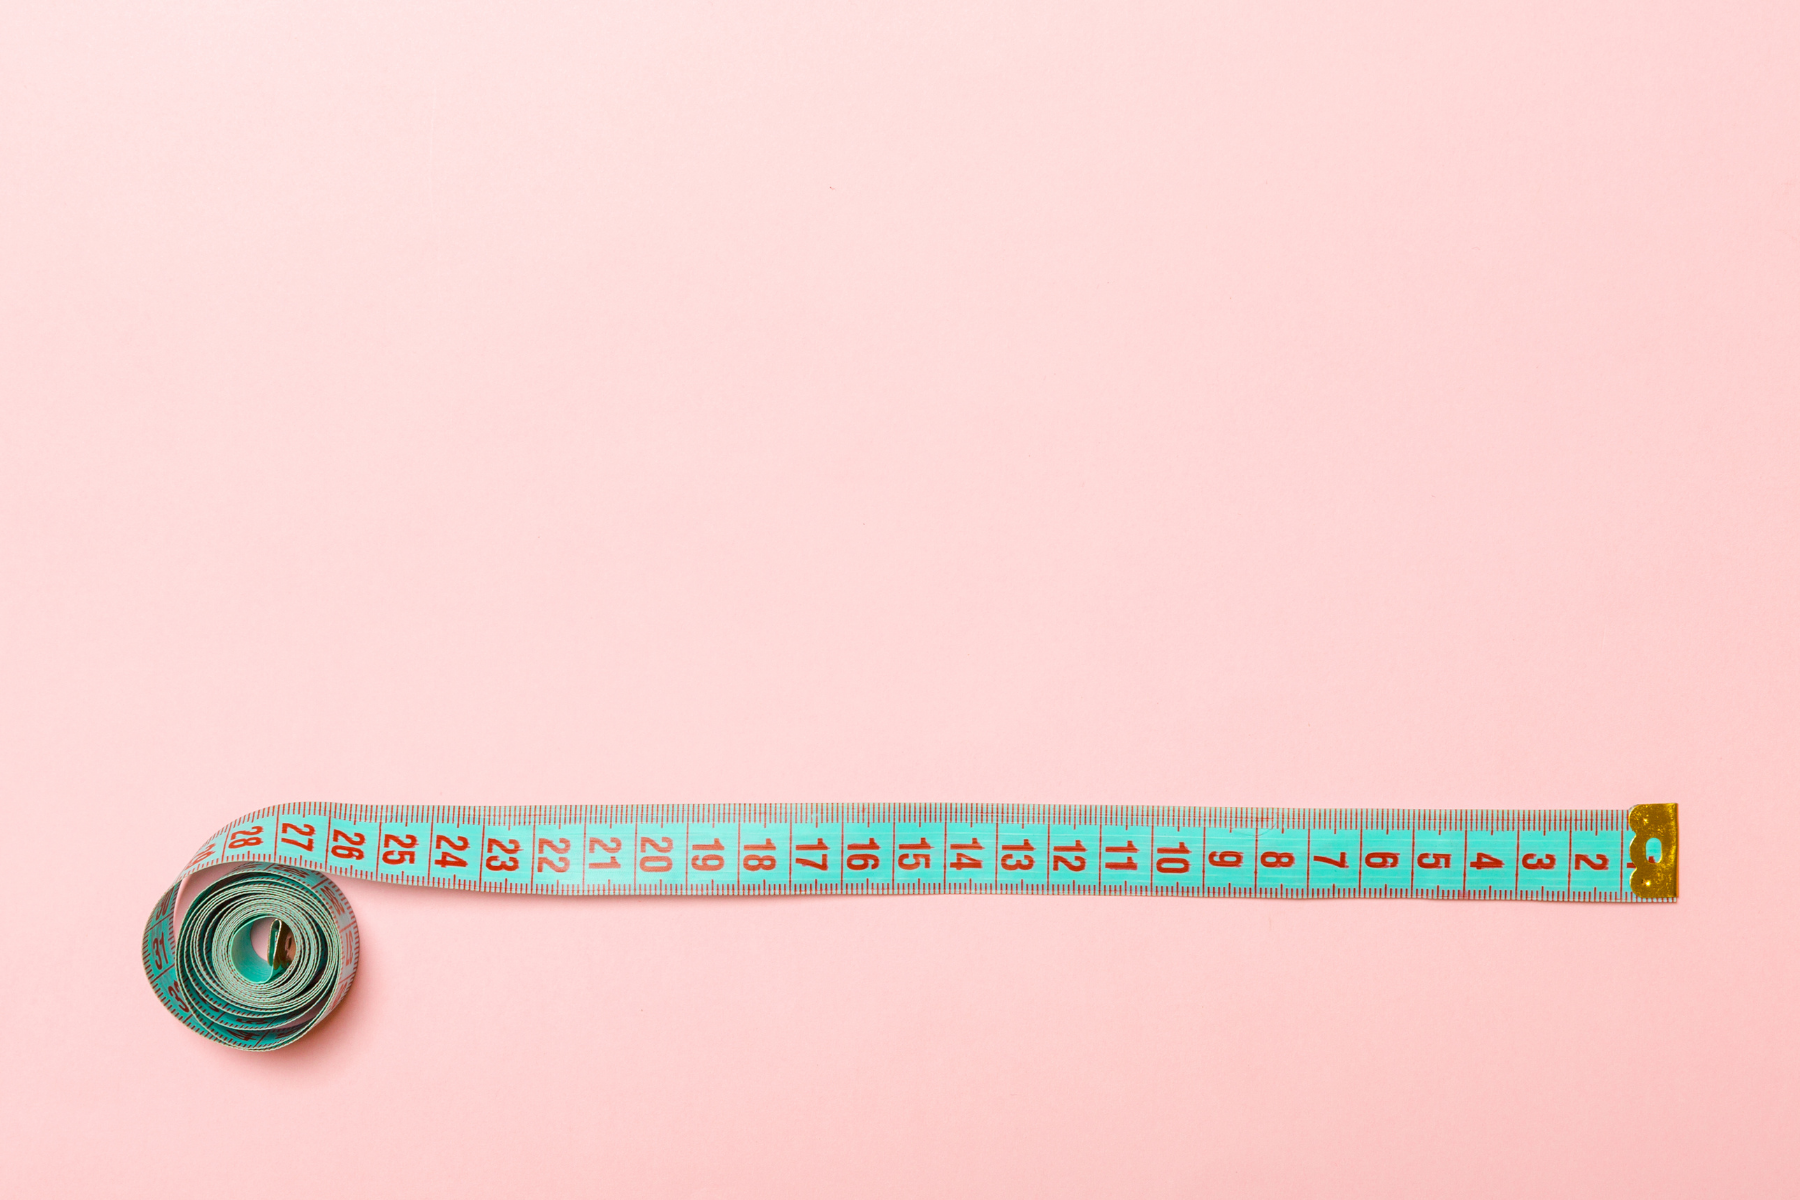 Image of a blue measuring tape that is partially unrolled against a pink background